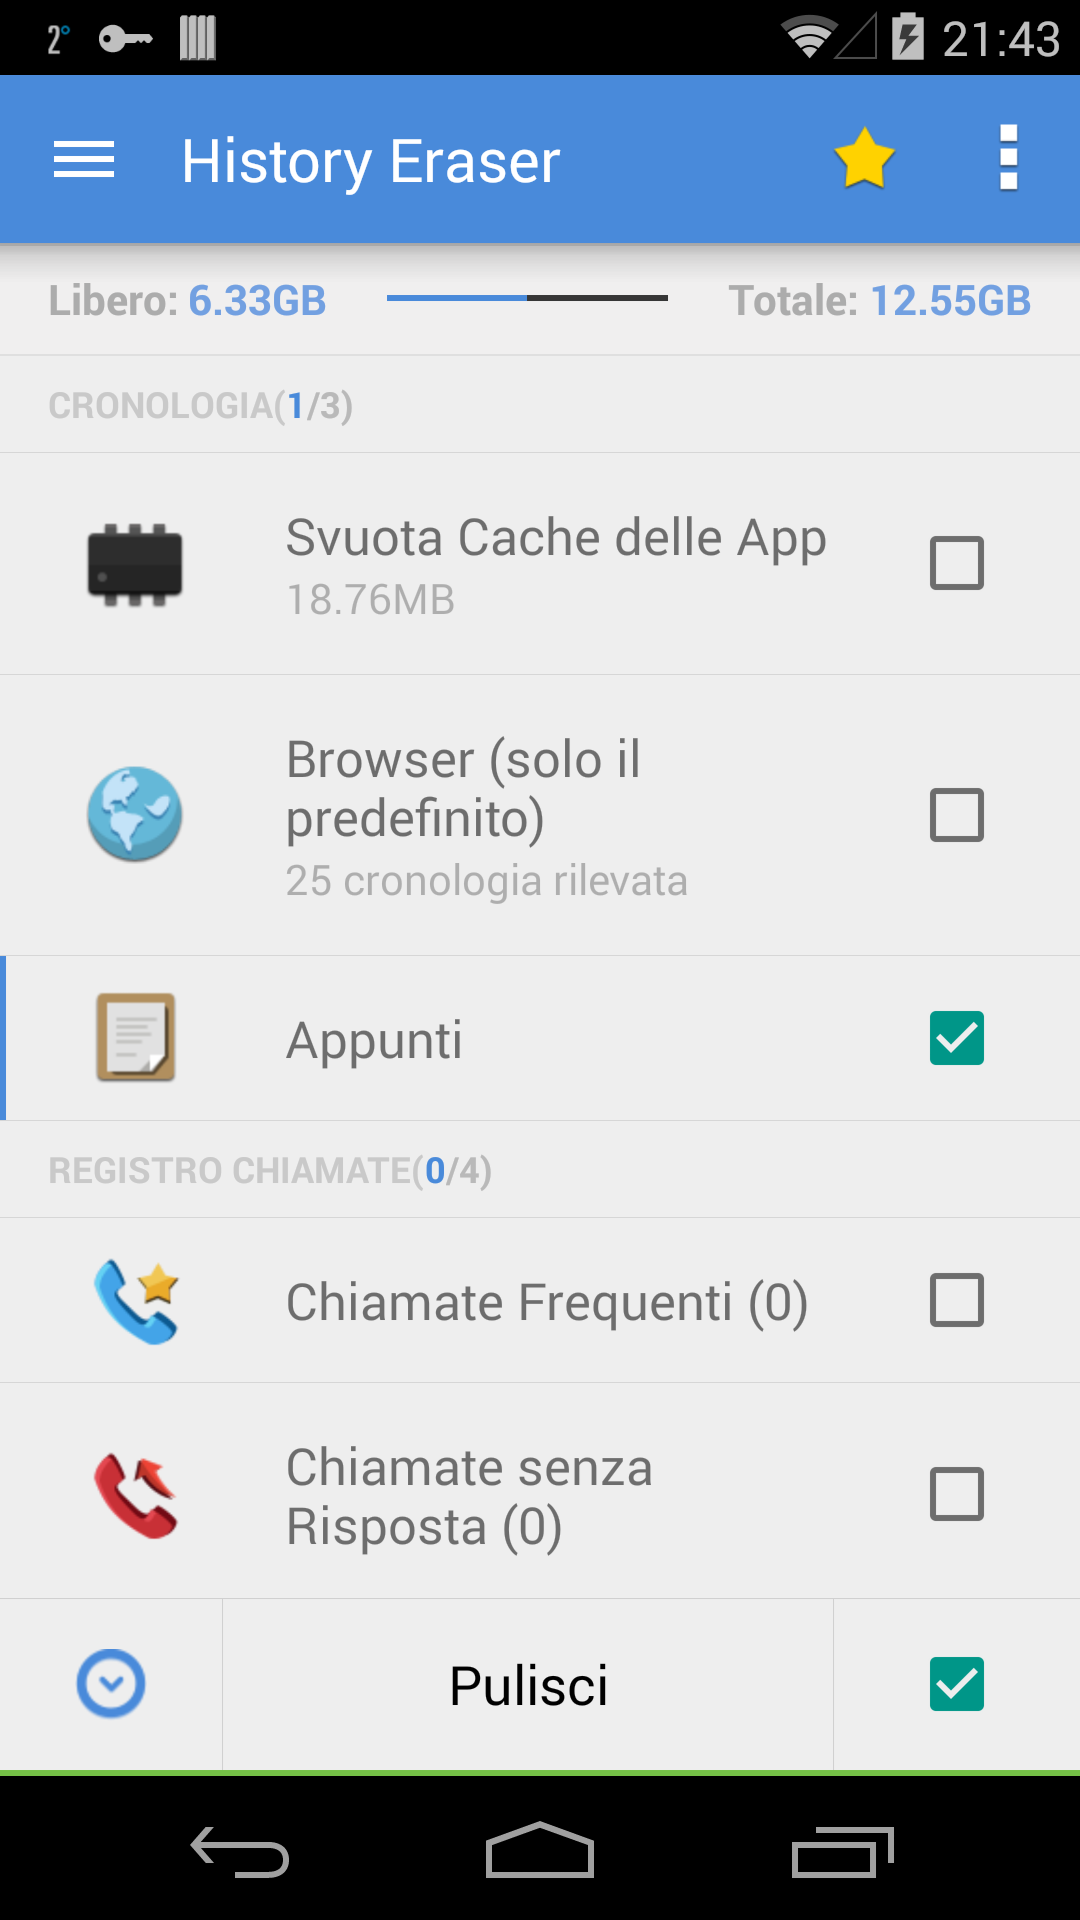 Android application History Eraser - Privacy Clean screenshort